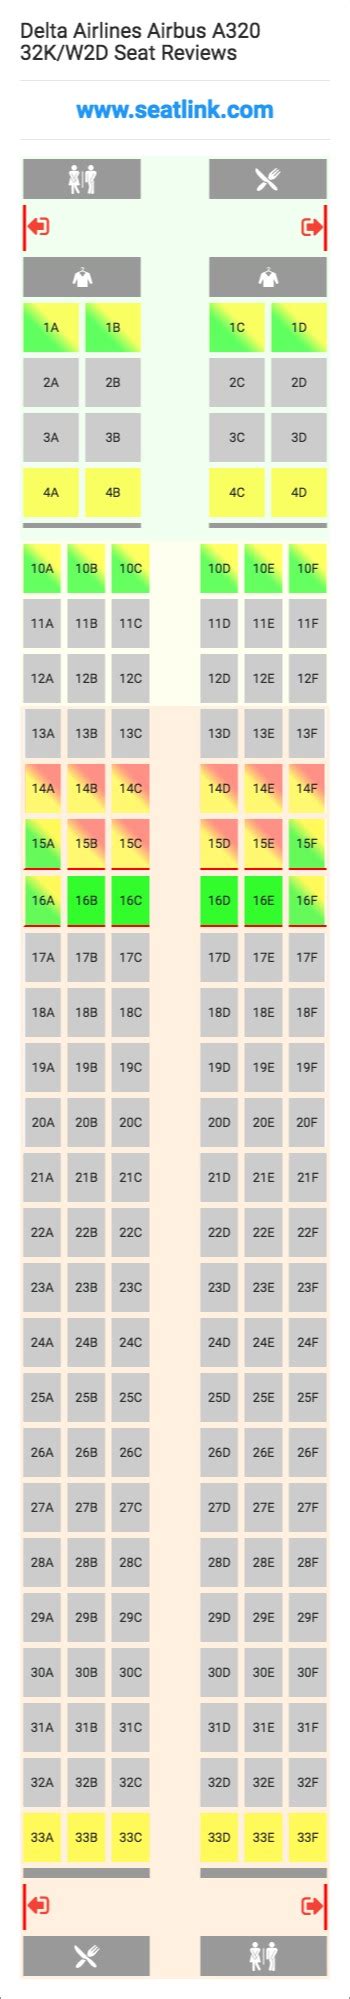 Delta Airlines Airbus A320 32kw2d Seating Chart Updated